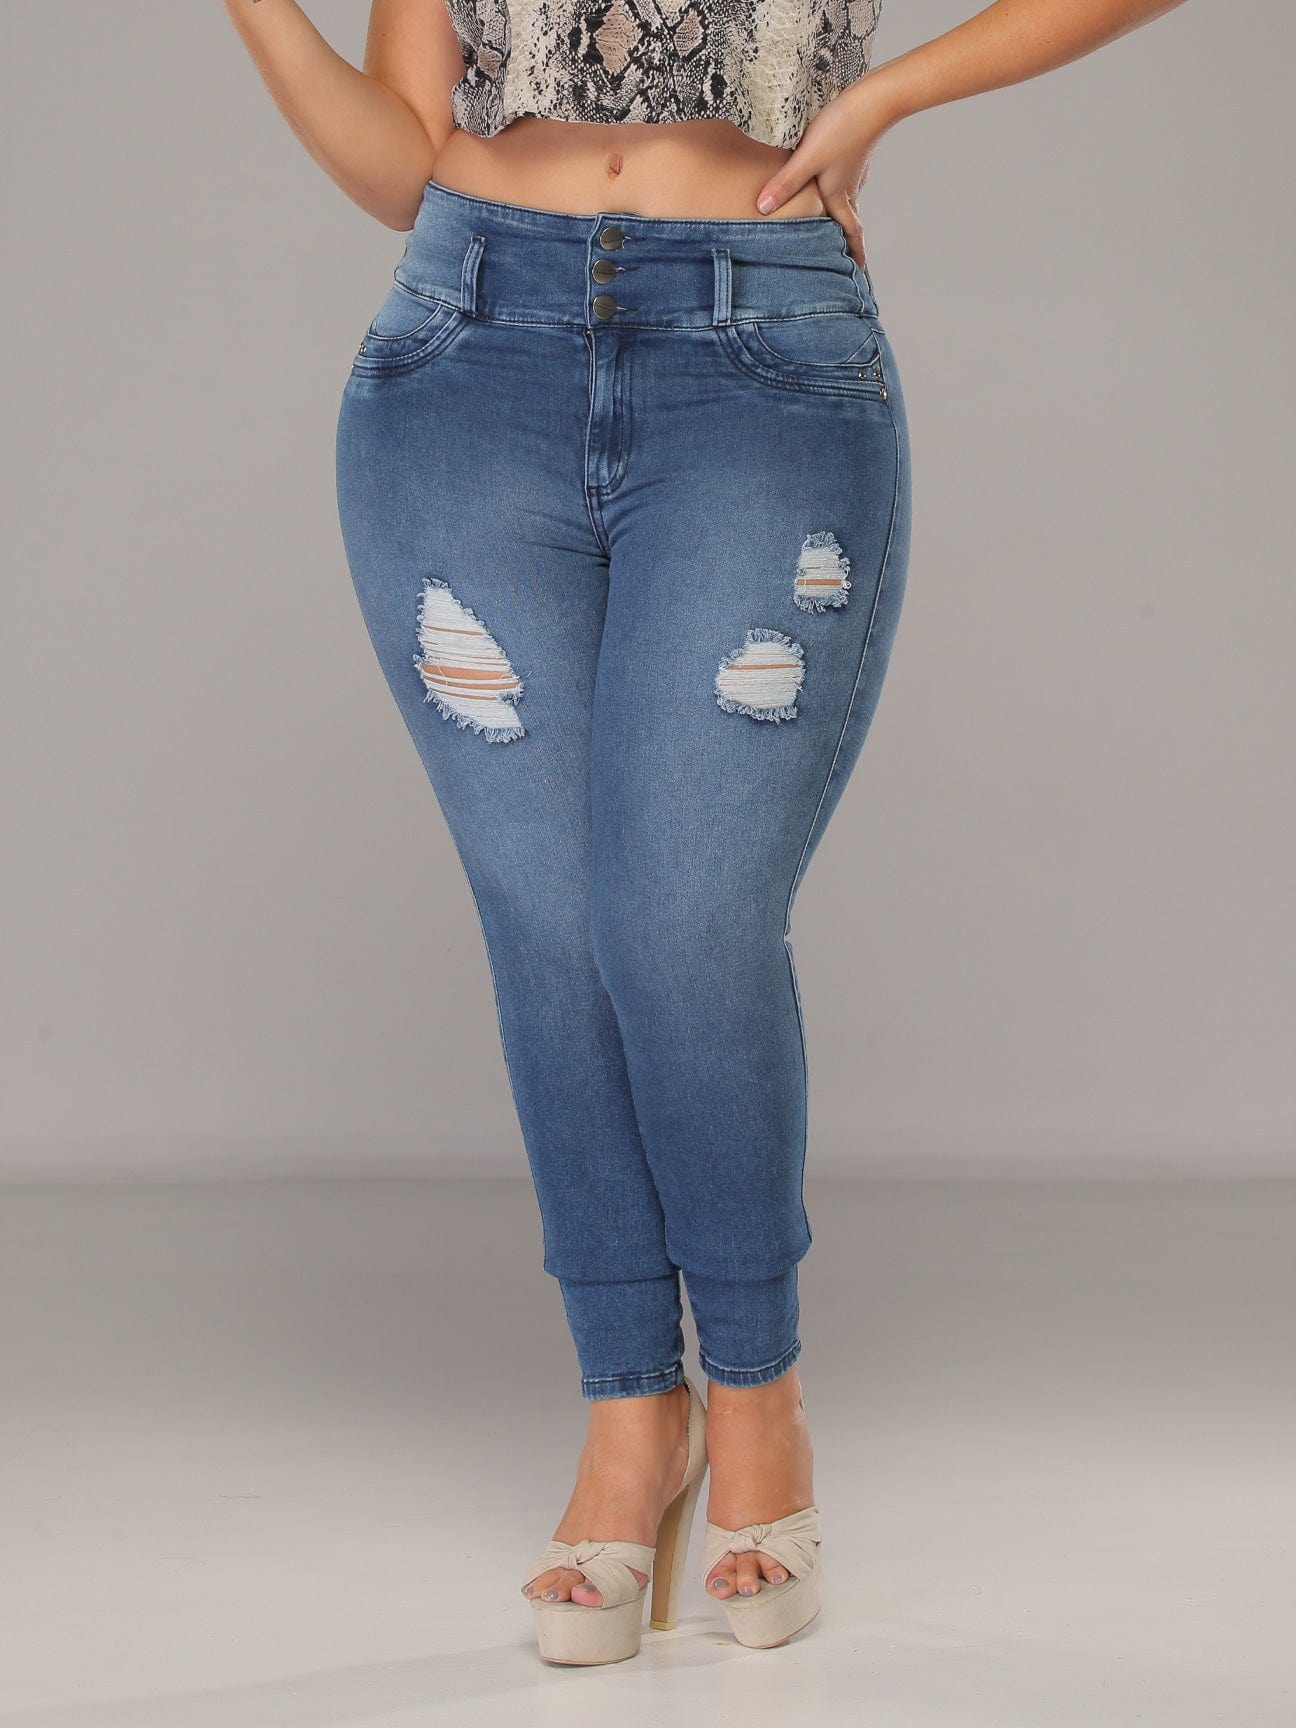 andy ellner recommends brazilian jeans plus size pic